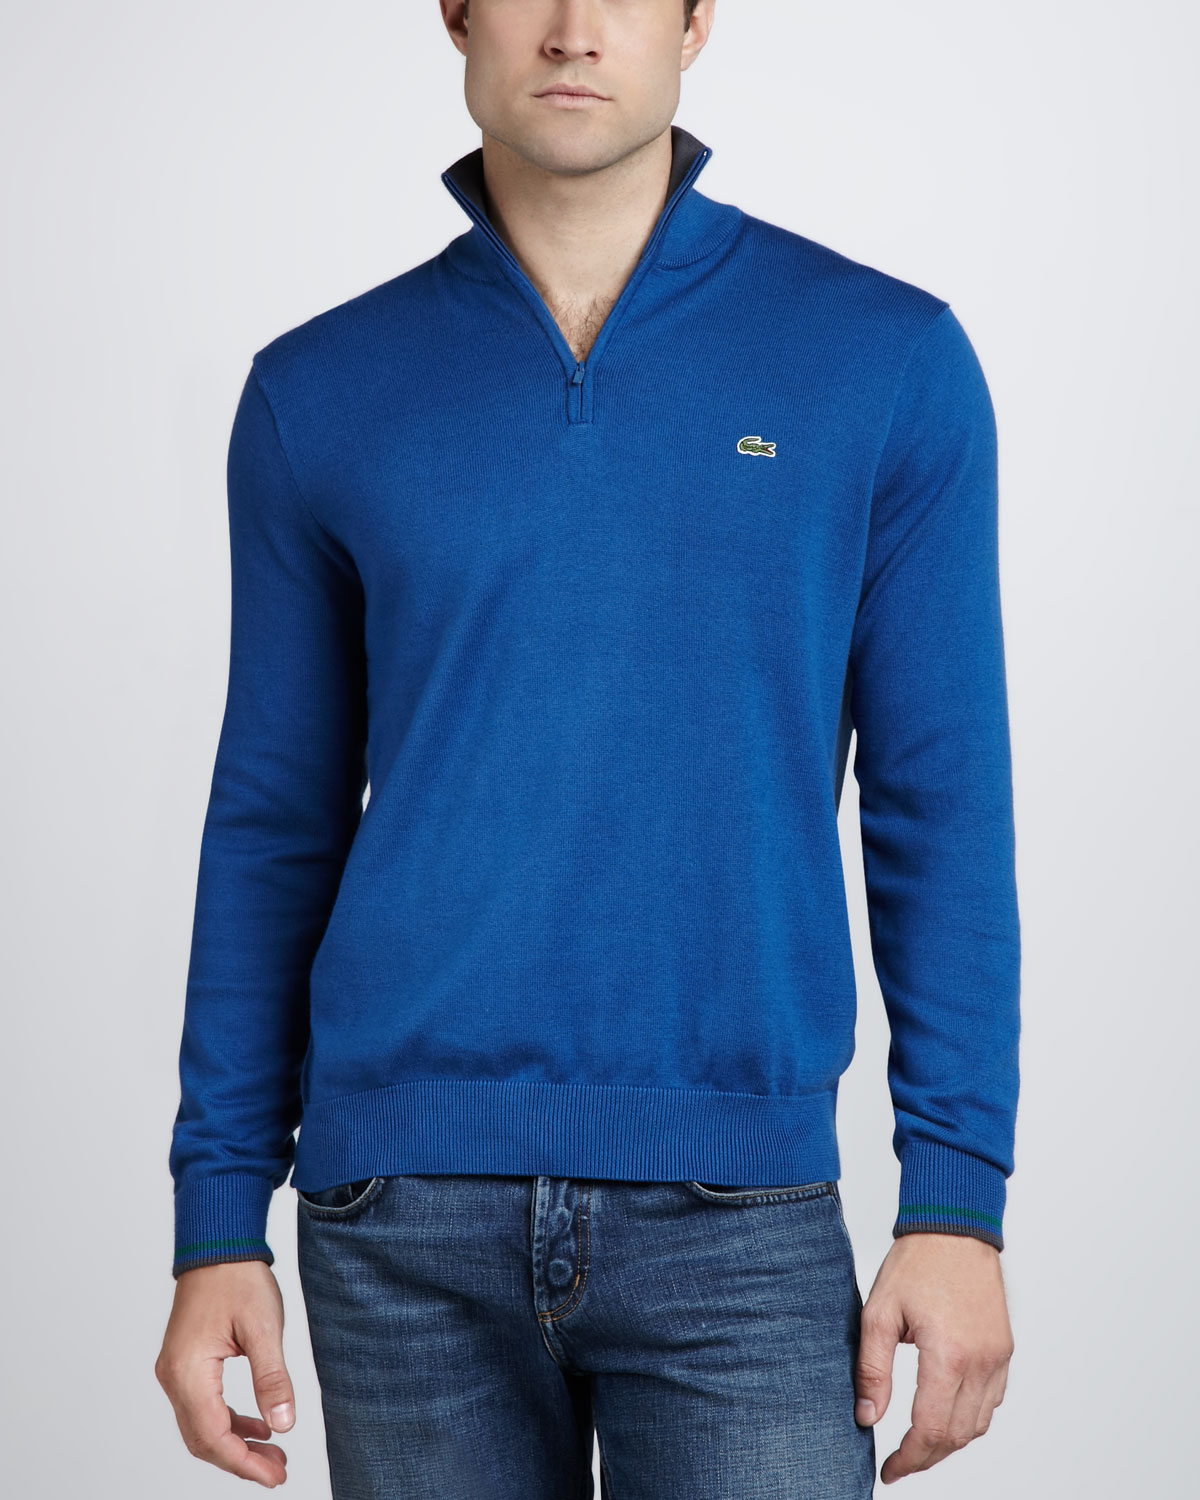 Lyst - Lacoste Halfzip Sweater Epic Blue in Blue for Men